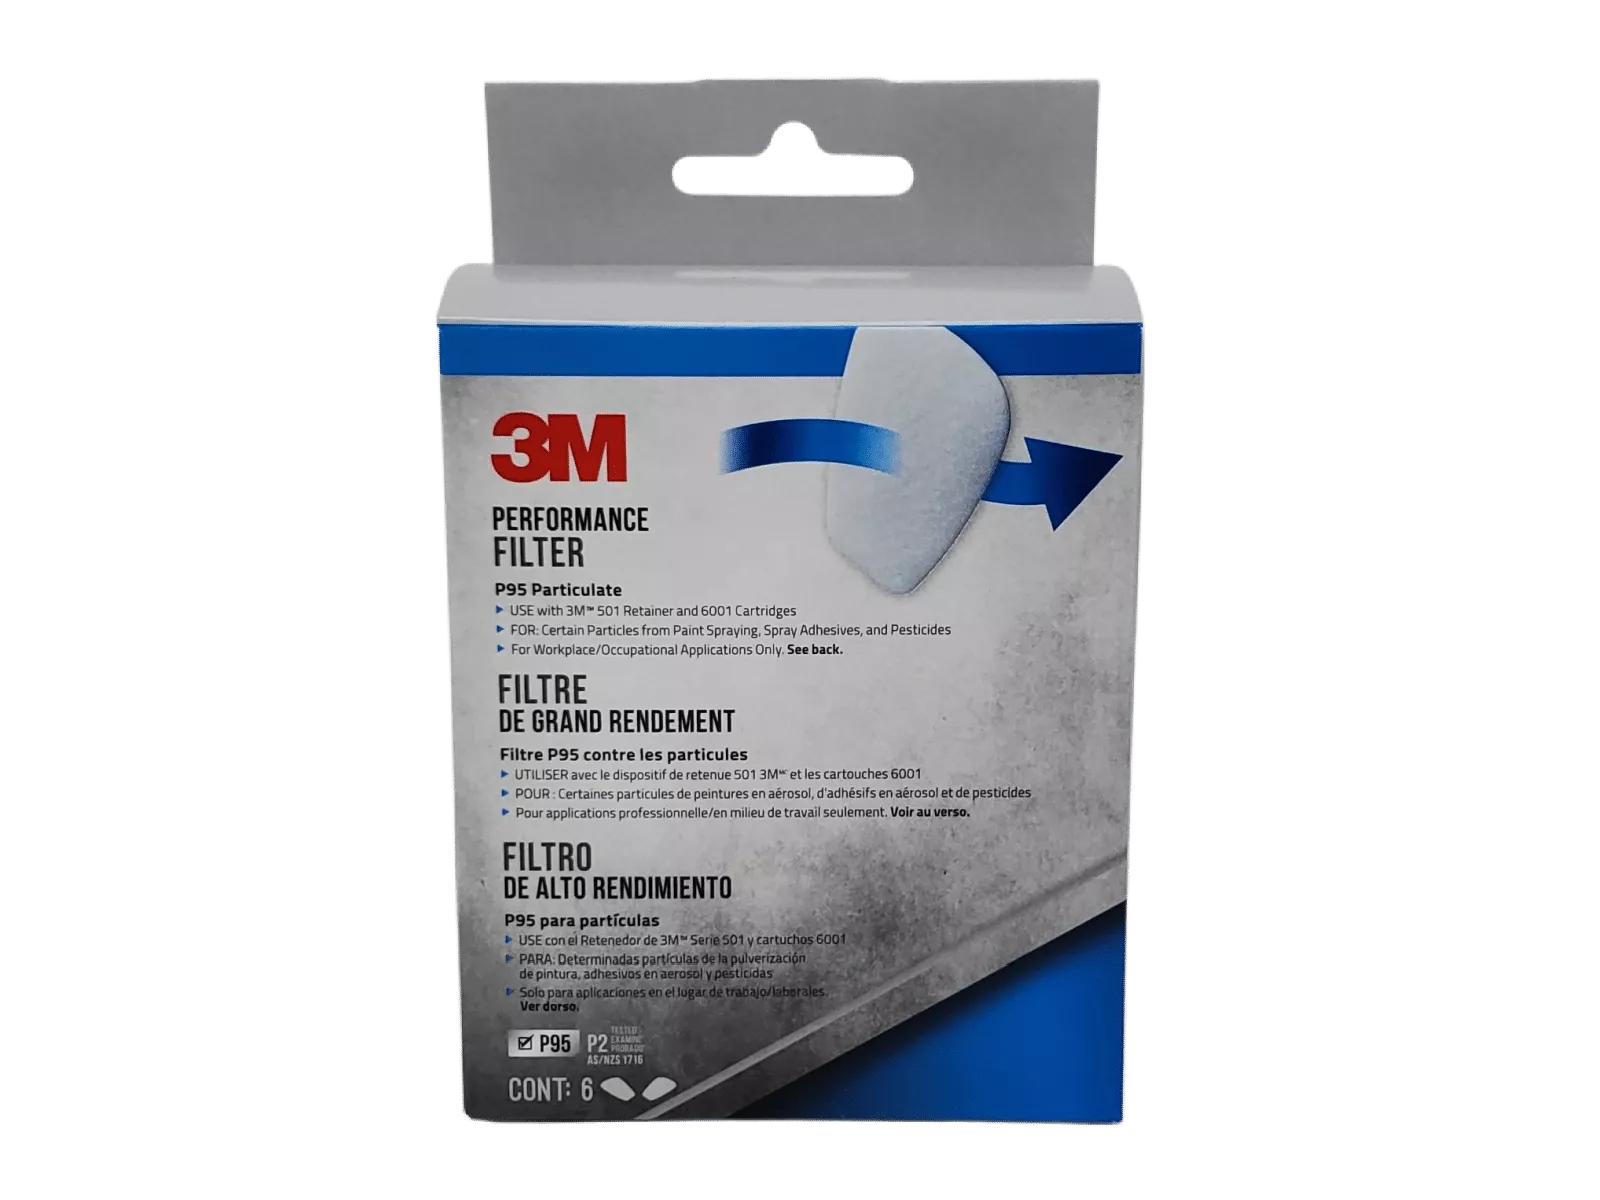 White Box of 3M Performance Filters - P95 Particulate, 6 Pack